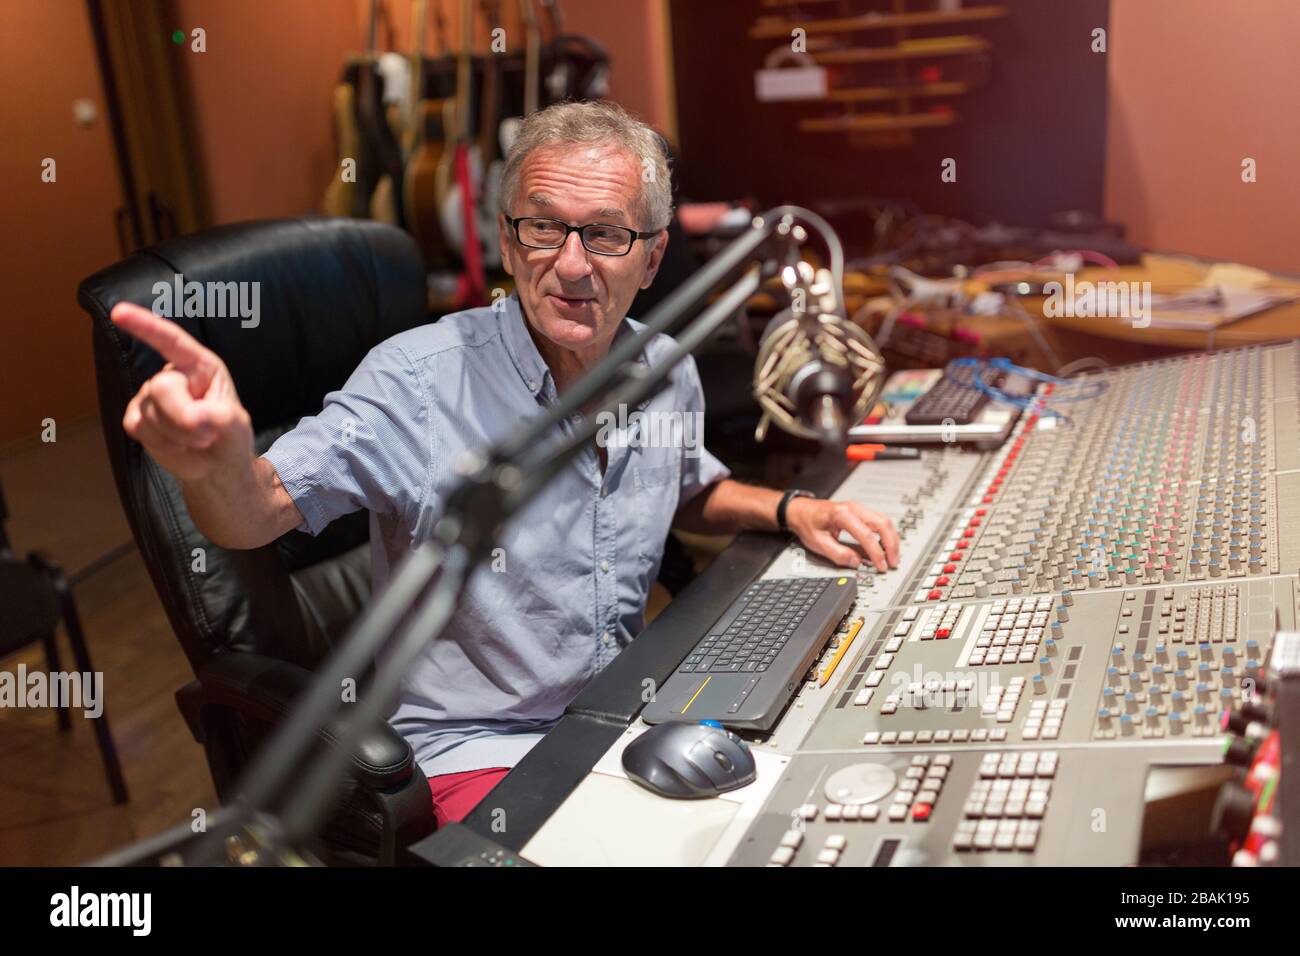 Mature man at mixing desk in a recording studio Stock Photo